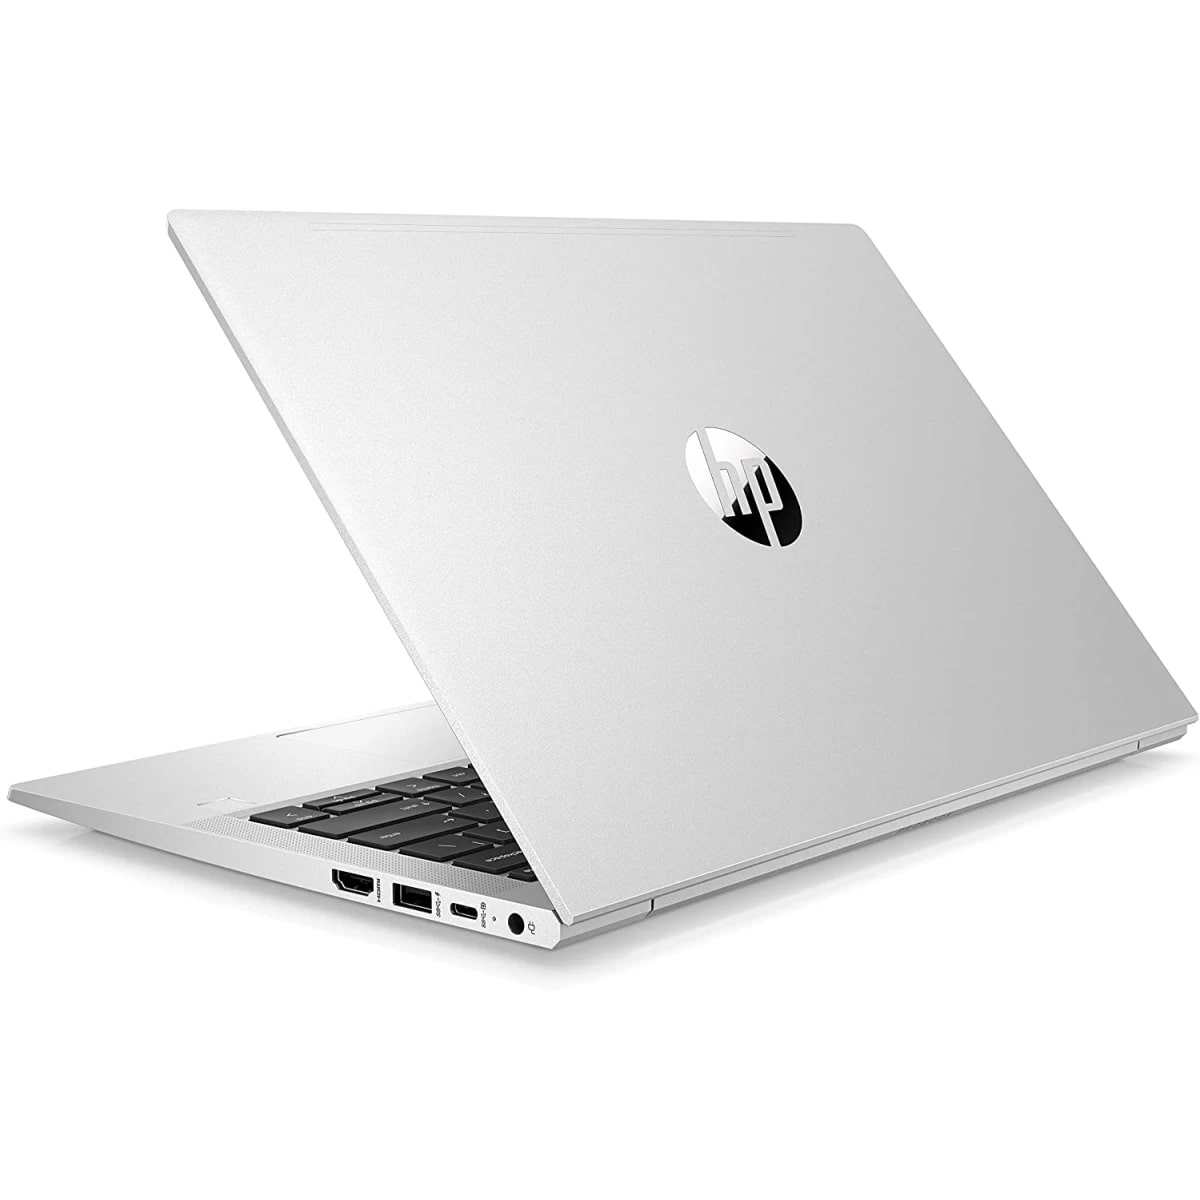 HP ProBook 440 G8 NEW 11th Gen Intel Core i5 up to 4.2GHZ 4-Core 8MB Cashe